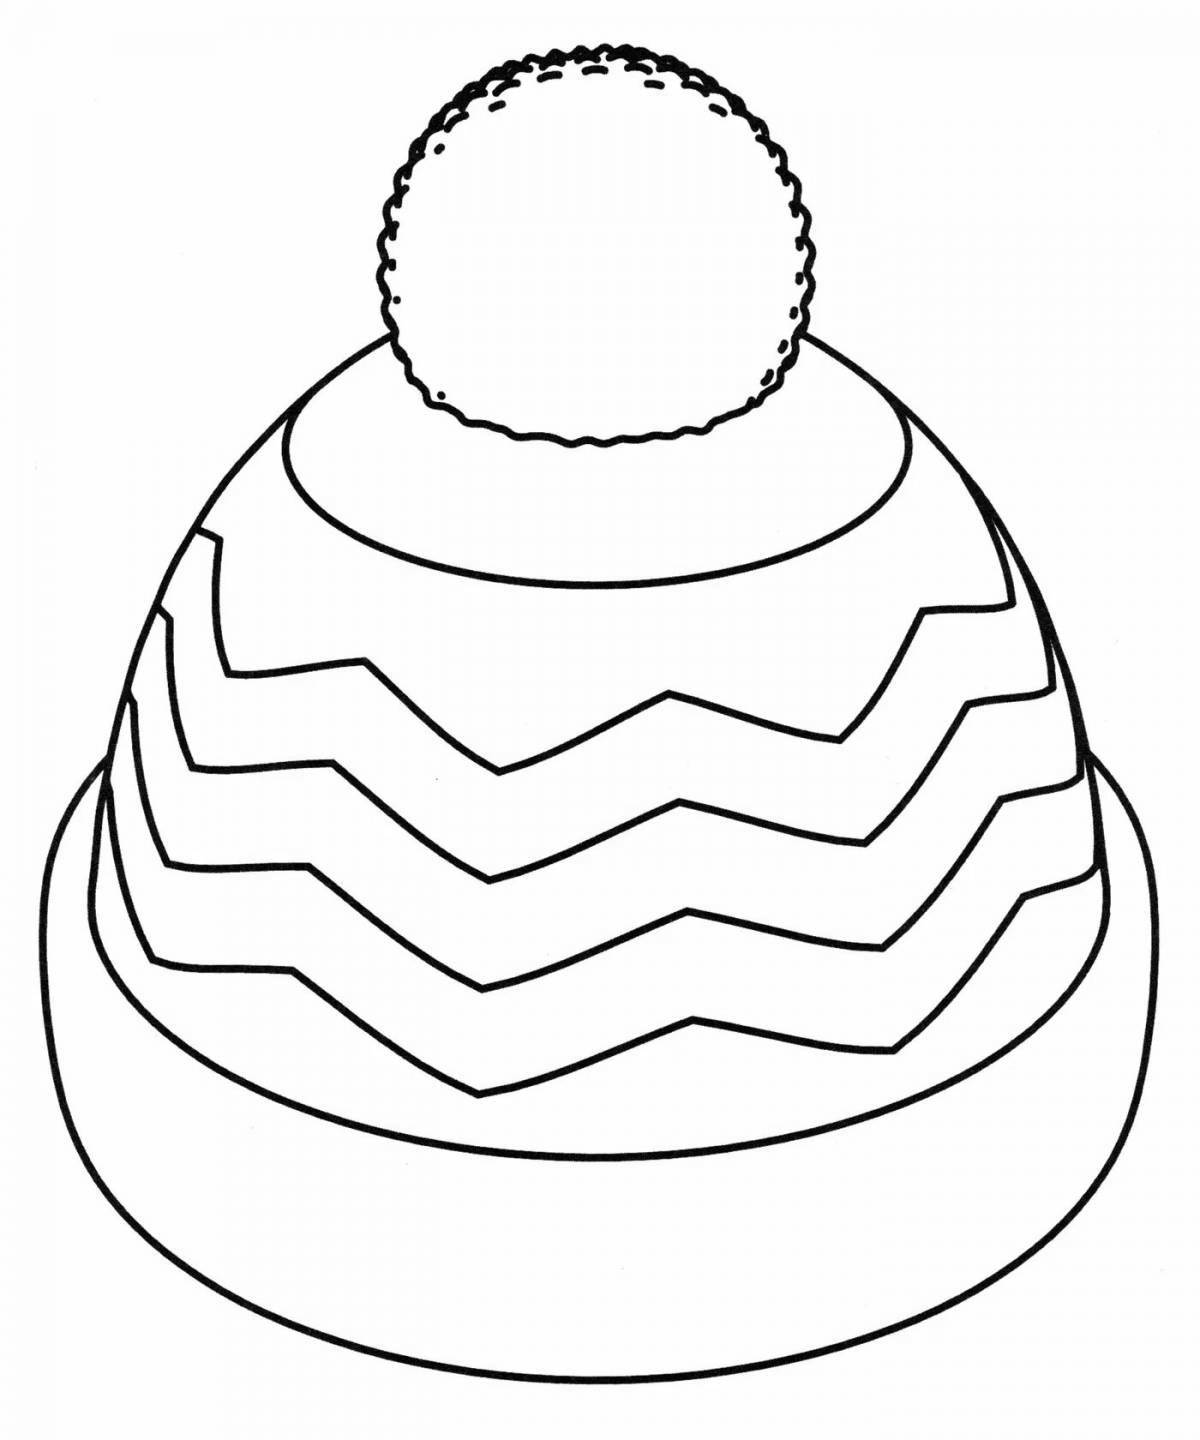 Coloring page festive winter hat